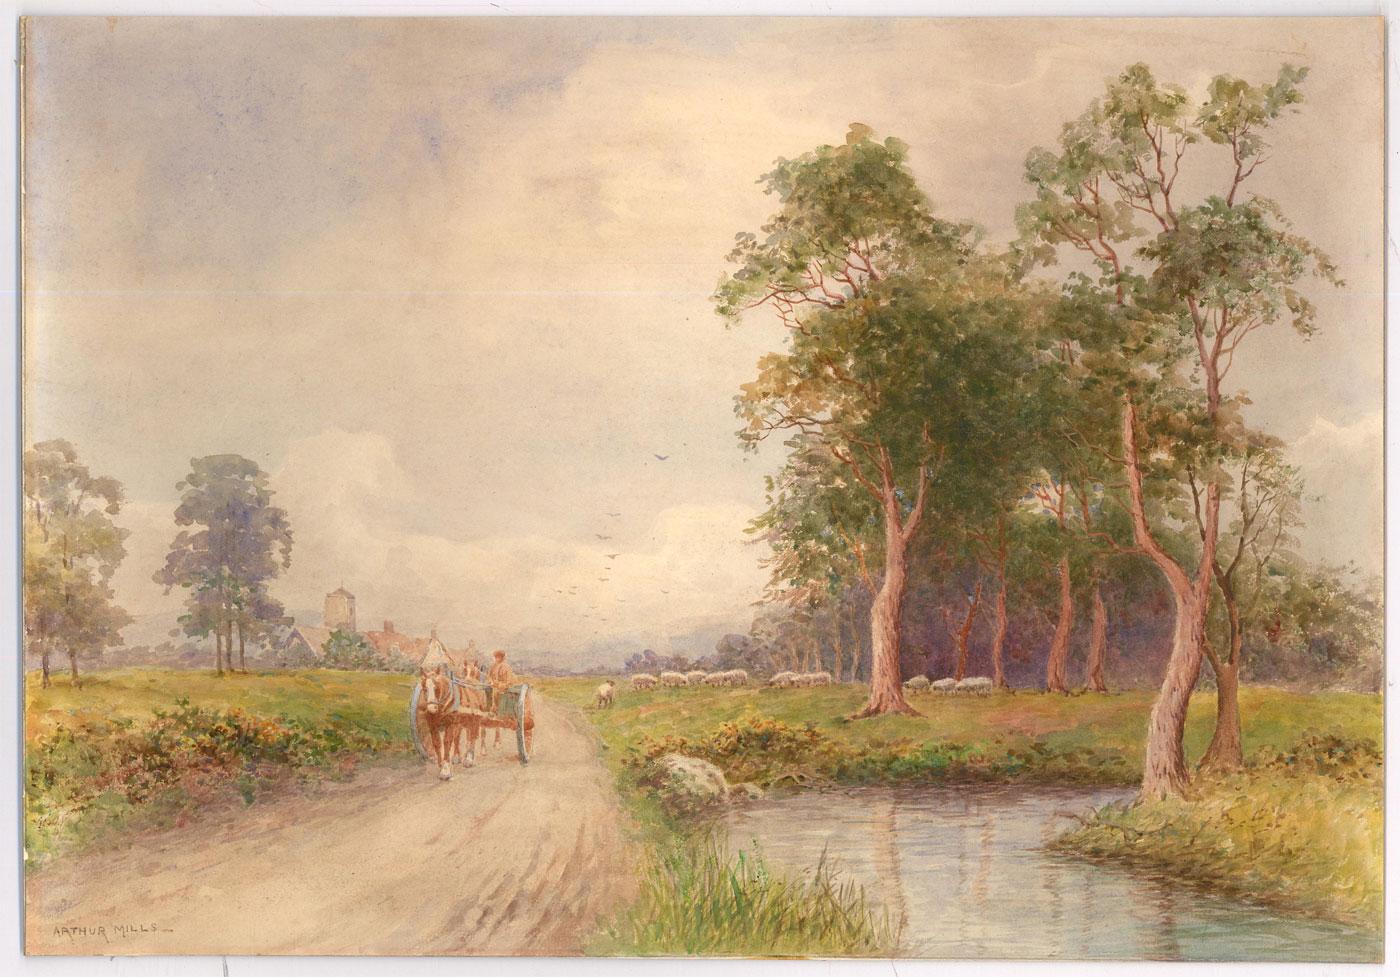 A delightful rural scene depicting a farmer with a horse and cart travelling down a country road away from the village. Signed to the lower left. On paper laid to board.
